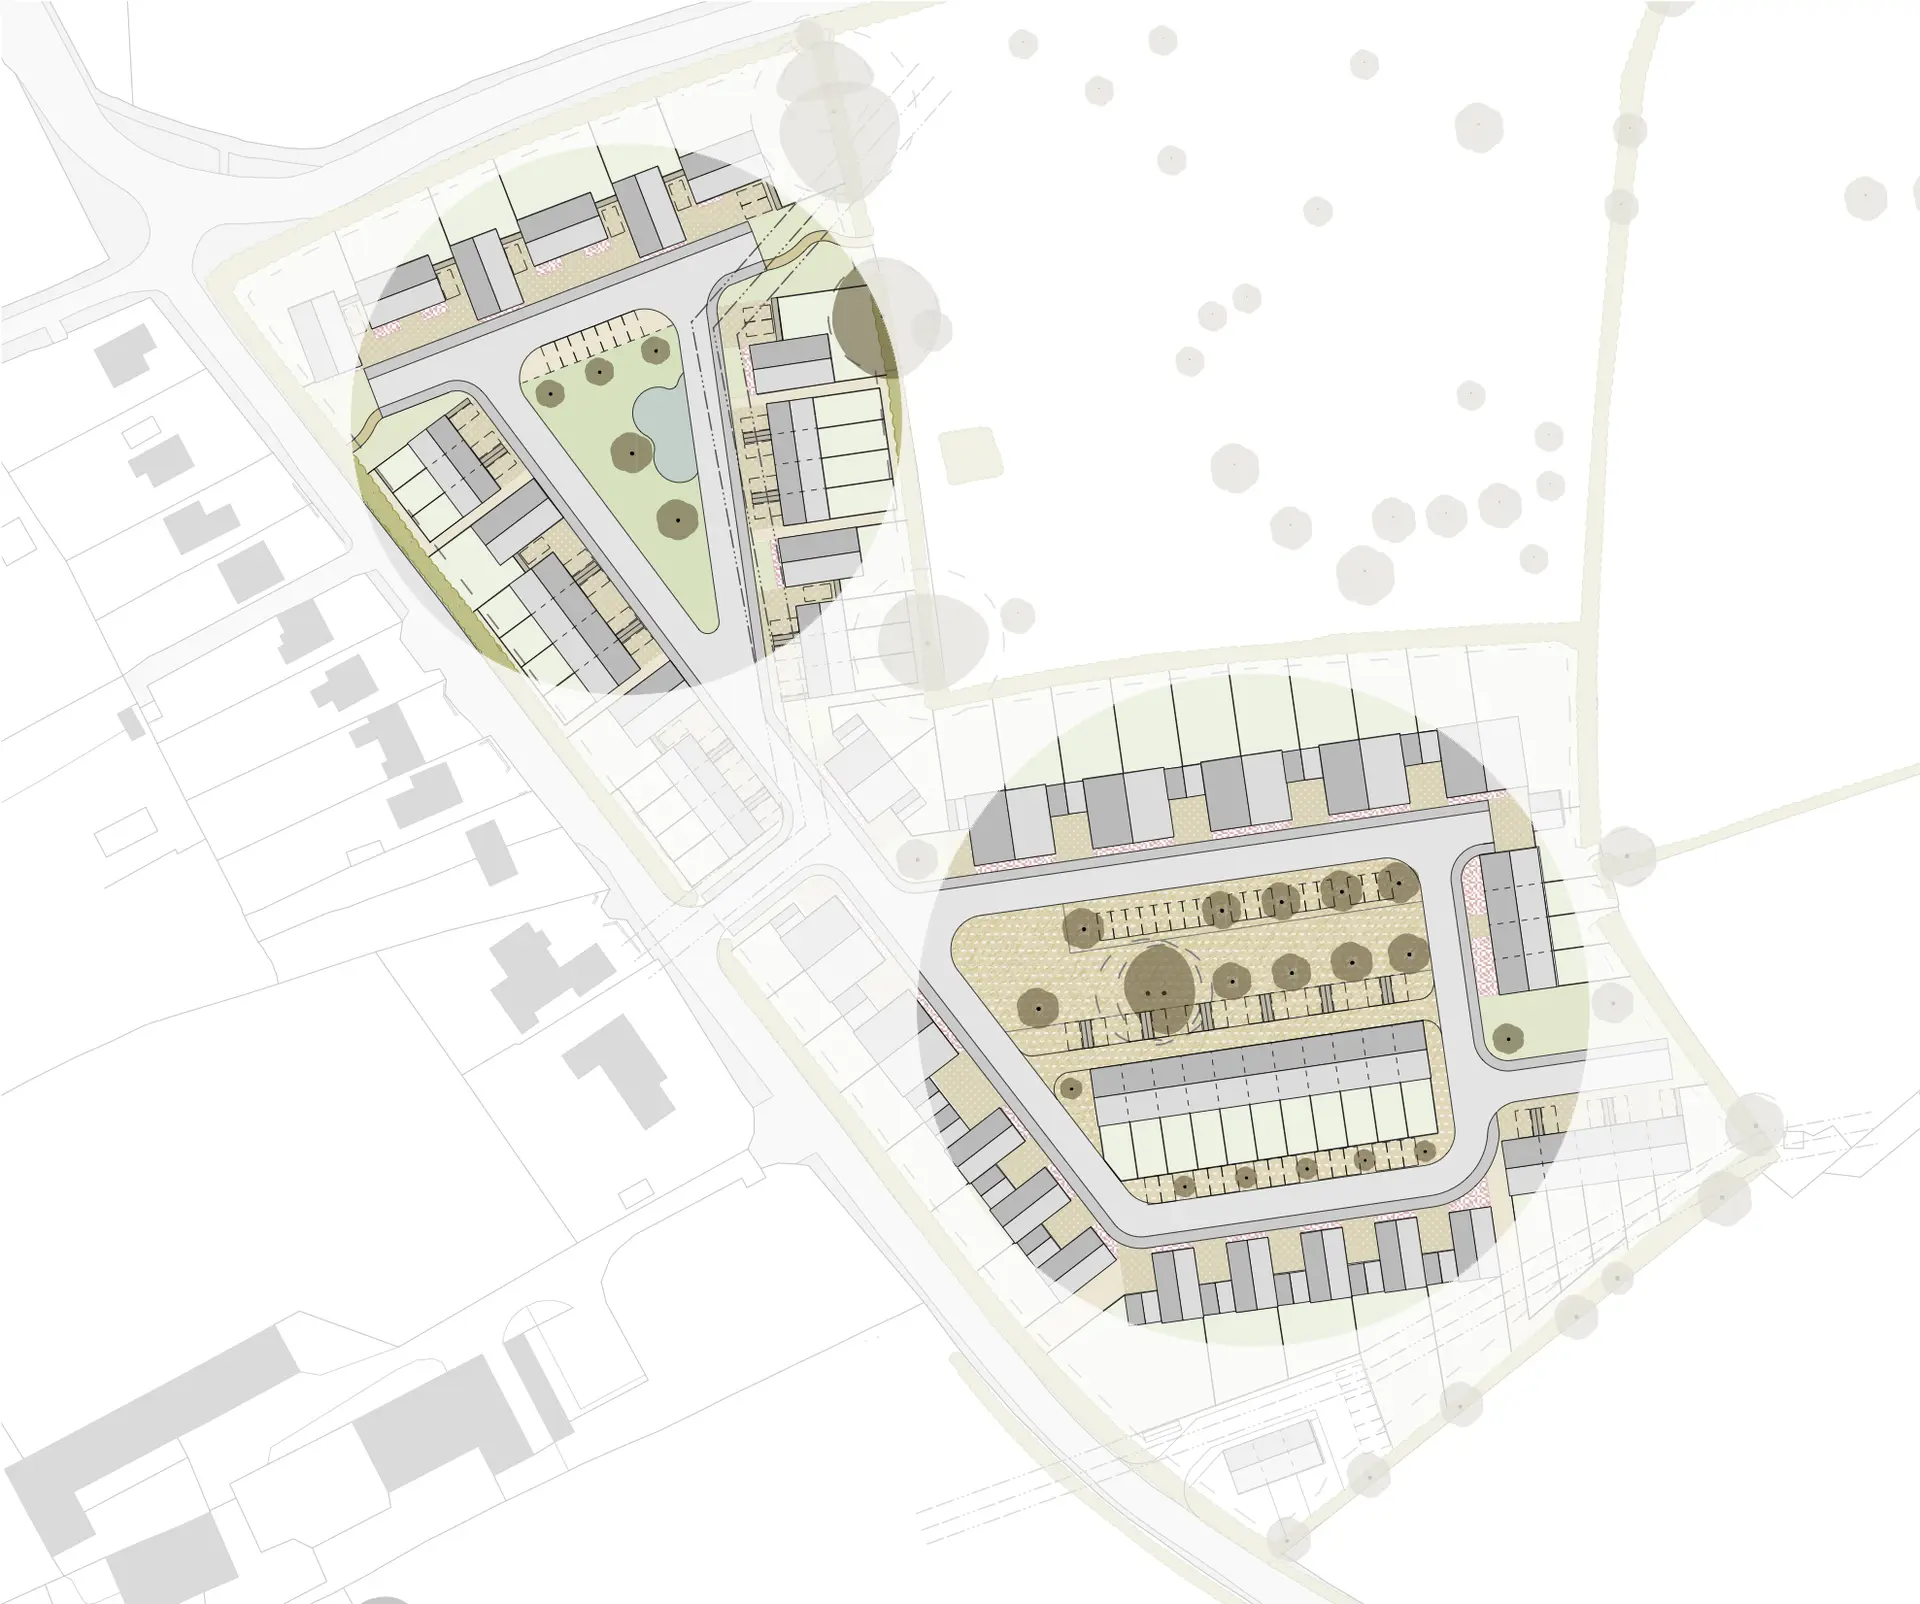 Site plan highlighting the 'village green' to the north, and paved square to the south